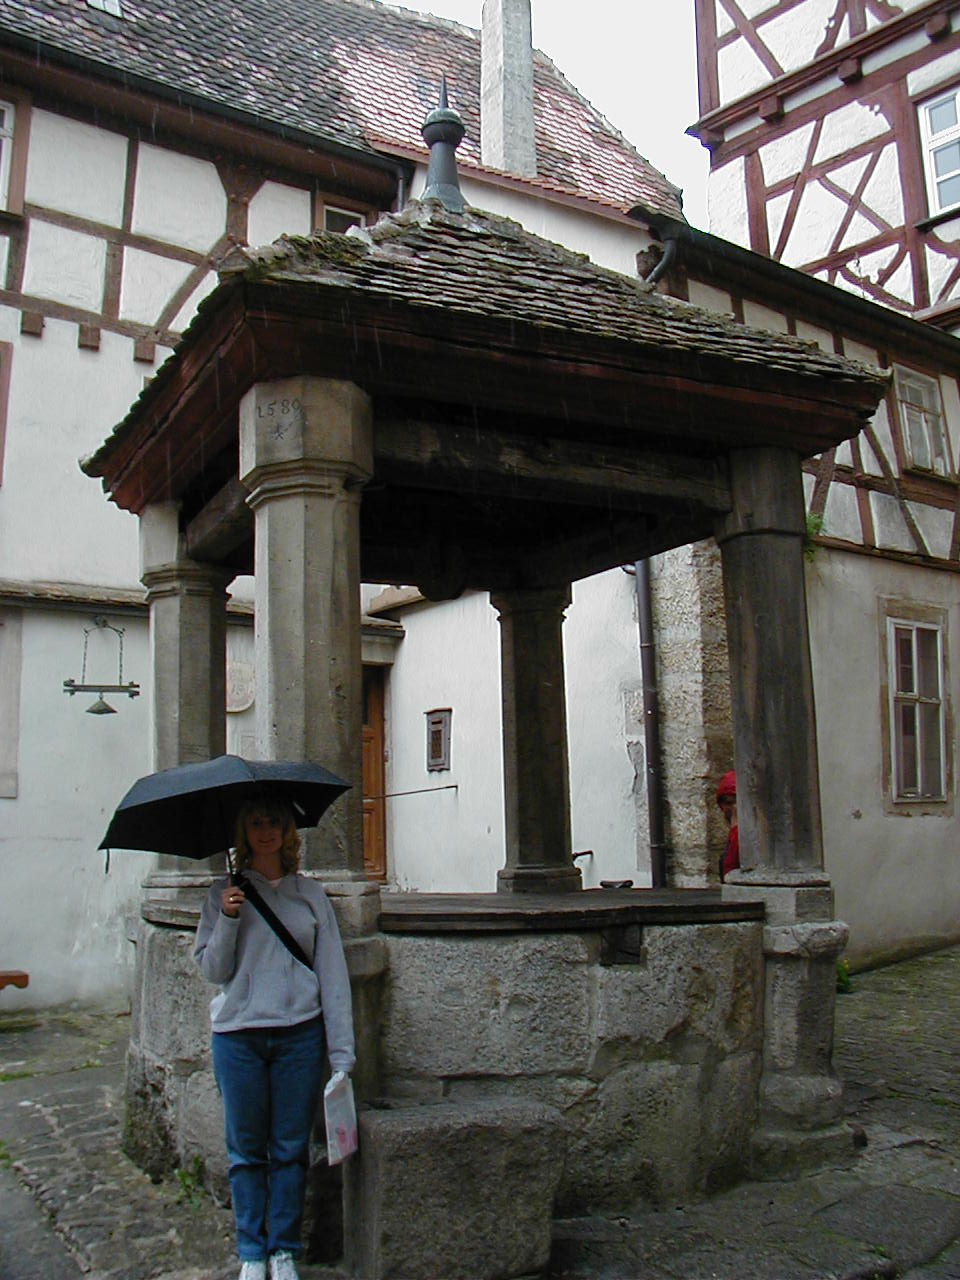 53-town_well_in_rothenberg.jpg